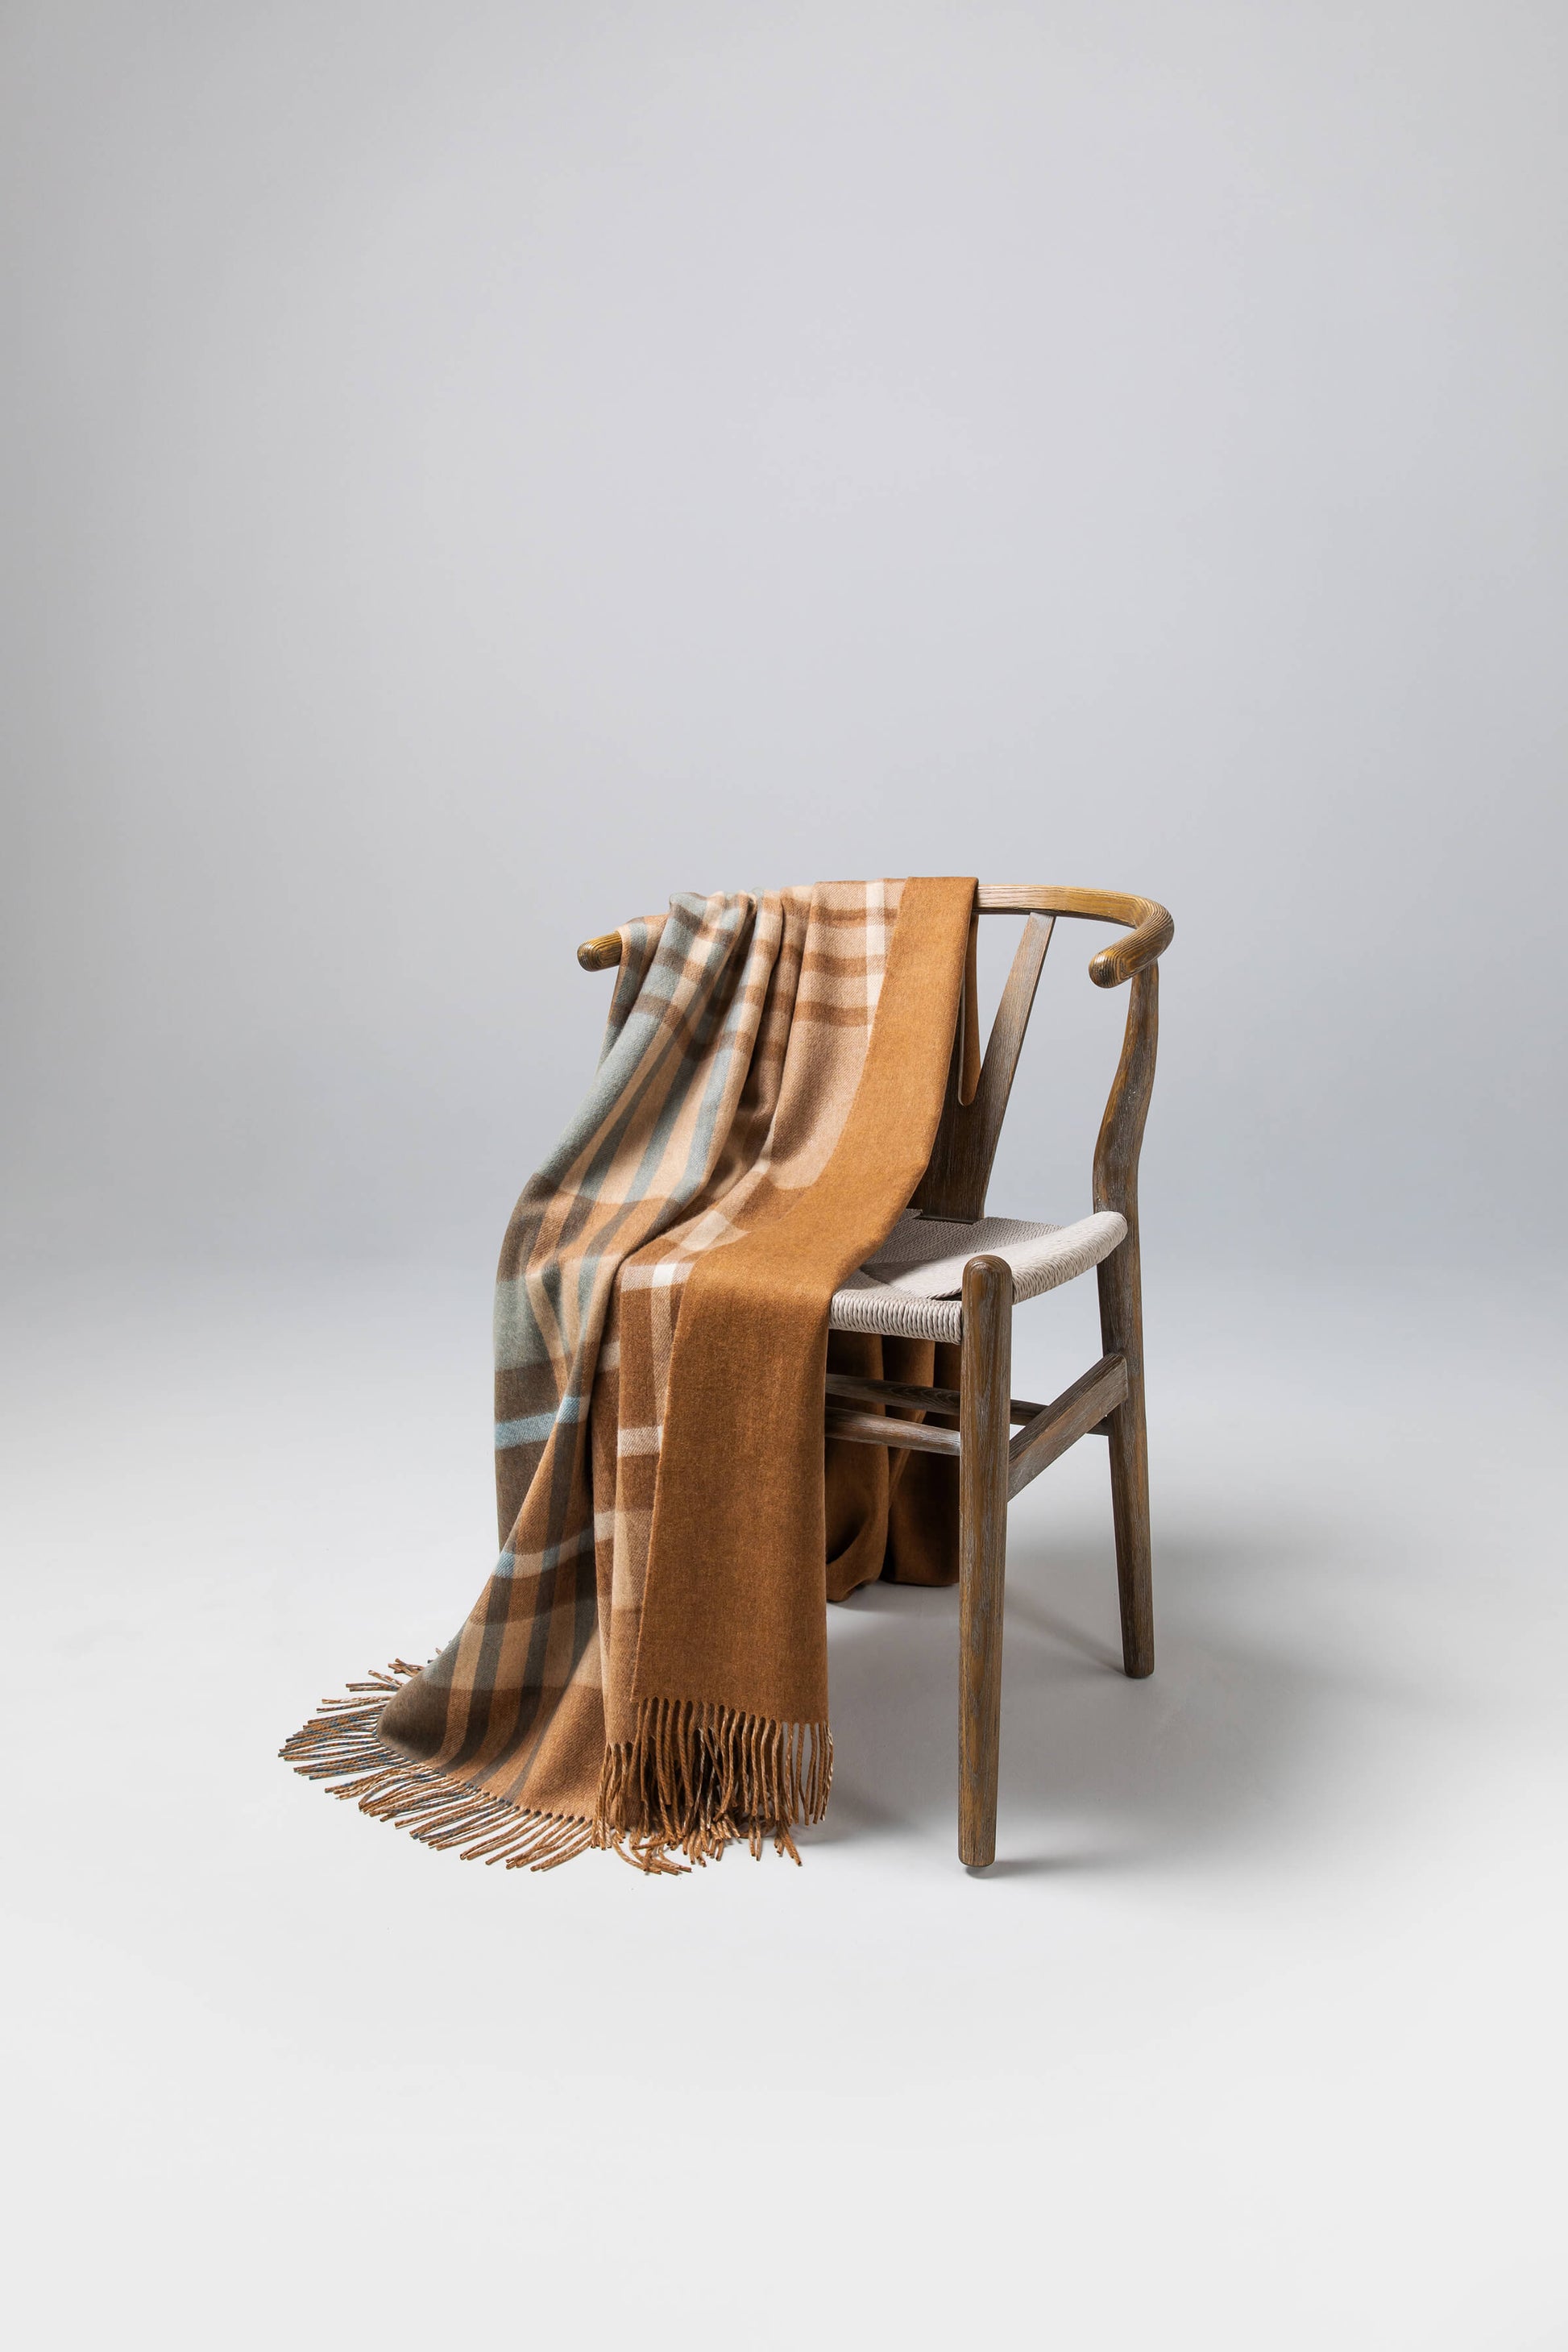 Johnstons of Elgin’s Connon Check Reversible Cashmere Throw on brown chair on a grey background WA000013RU7285